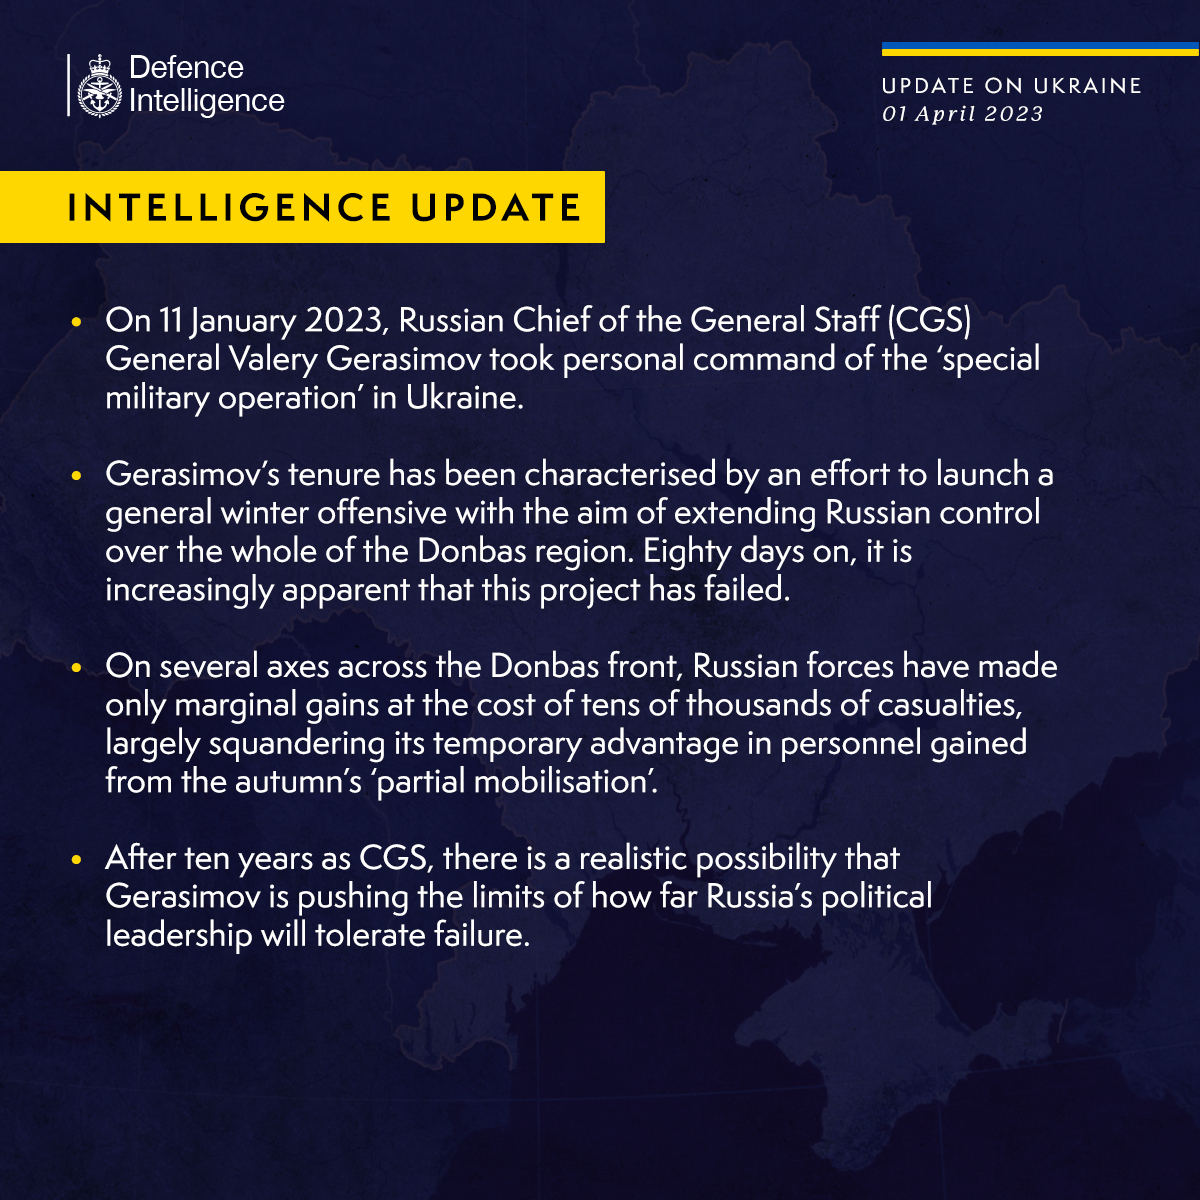 Latest Defence Intelligence update on the situation in Ukraine - 01 April 2023.